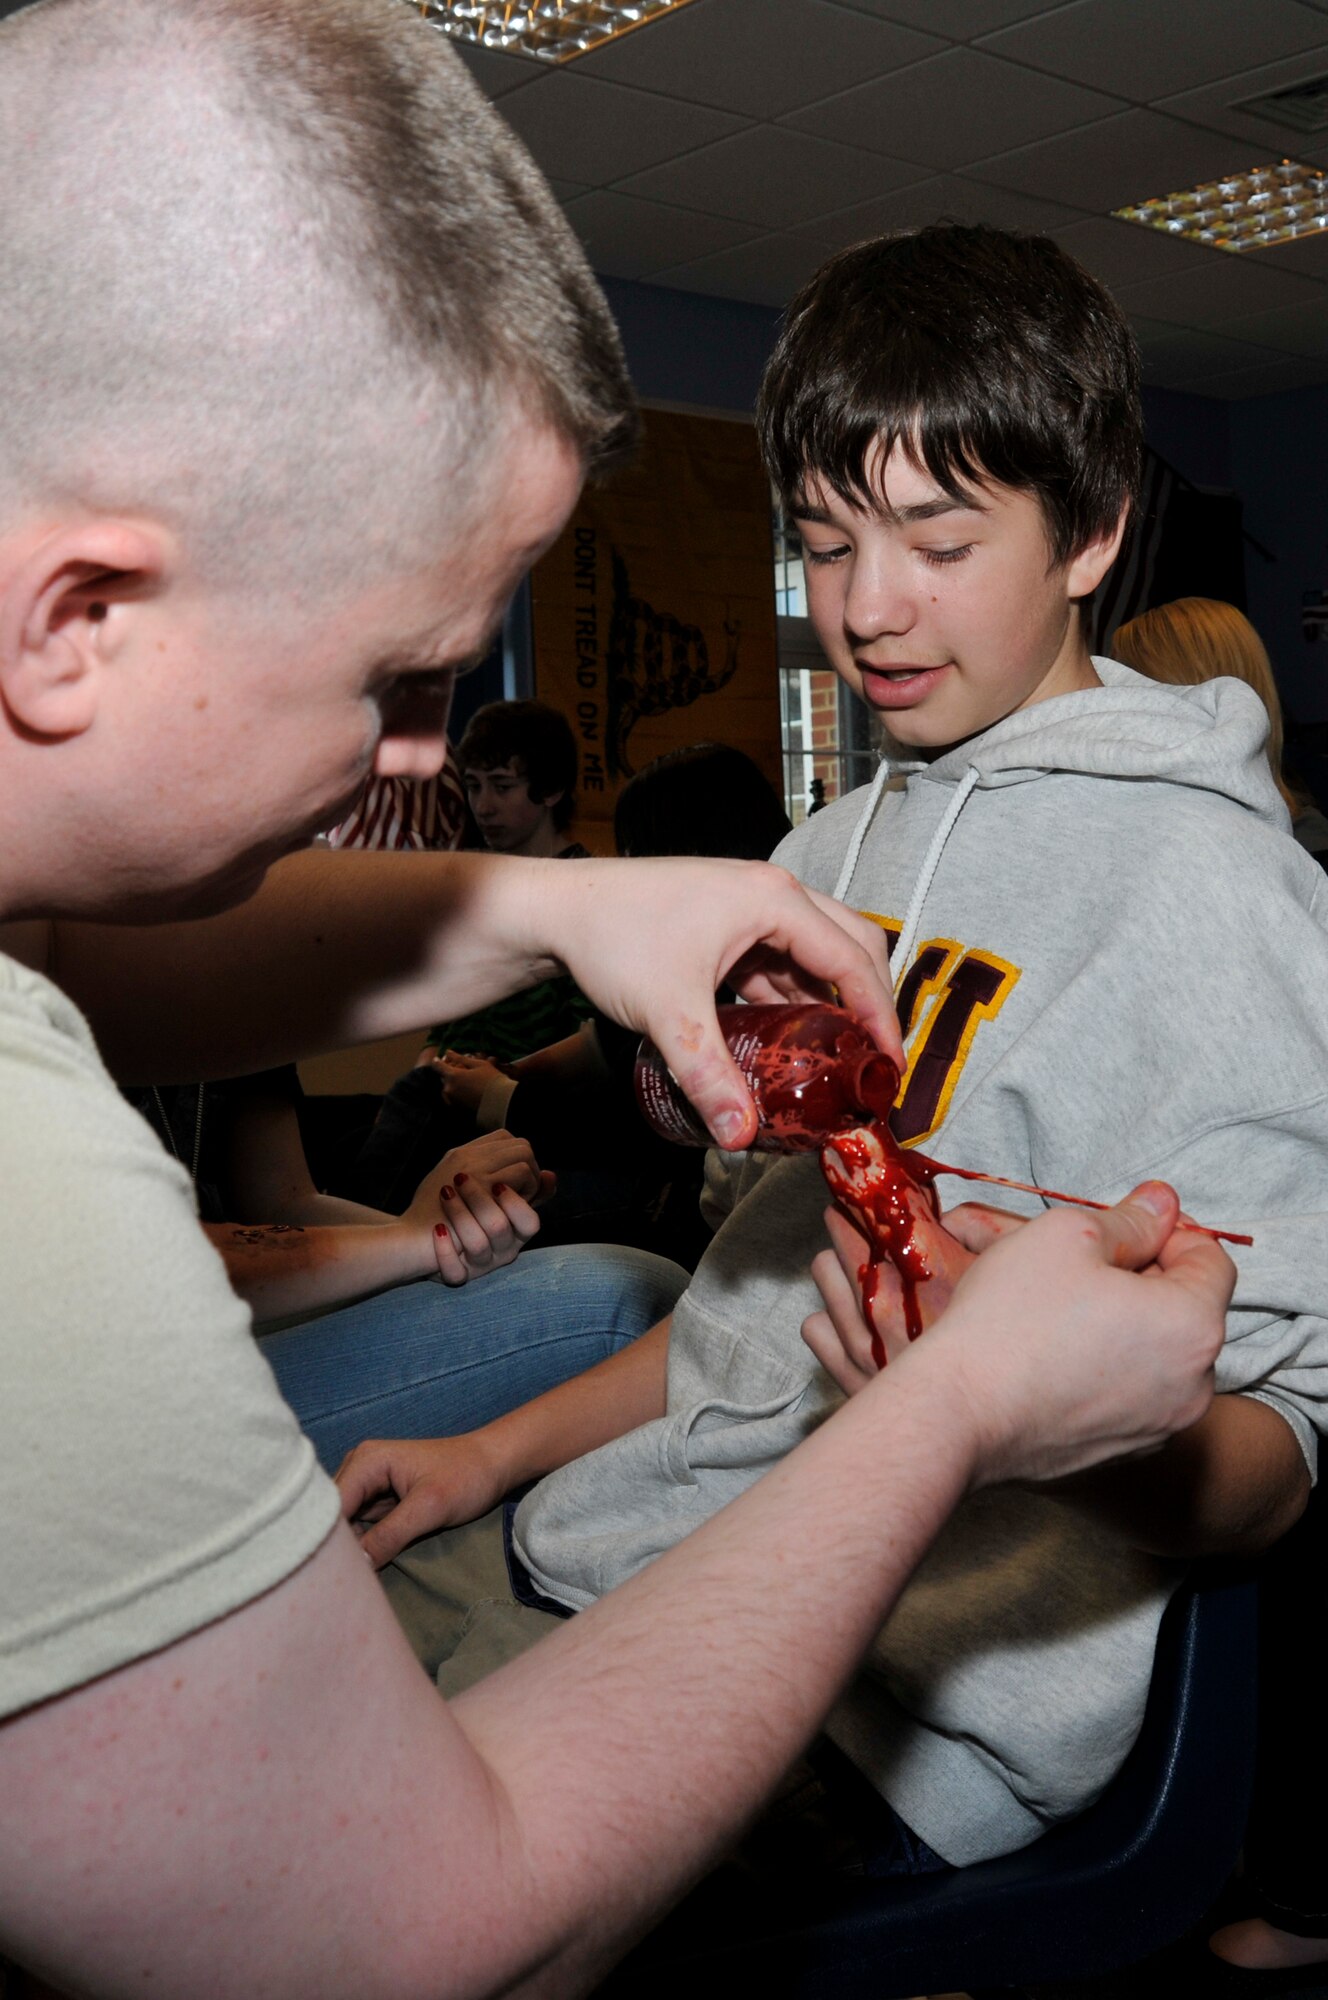 Tech Sgt. Victor Malone, 48th Medical Group NCO in charge of clinical education pours fake blood on Derrick Hoopes, son of Capt. Jerry Hoopes, 48th Medical Operations Squadron as part of a simulated amputation March 23, 2009 at RAF Feltwell, England. Moulage is the art of applying mock injuries for the purpose of training first responders and emergency medical personnel (U.S. Air Force photo by Airman 1st Class Perry Aston)